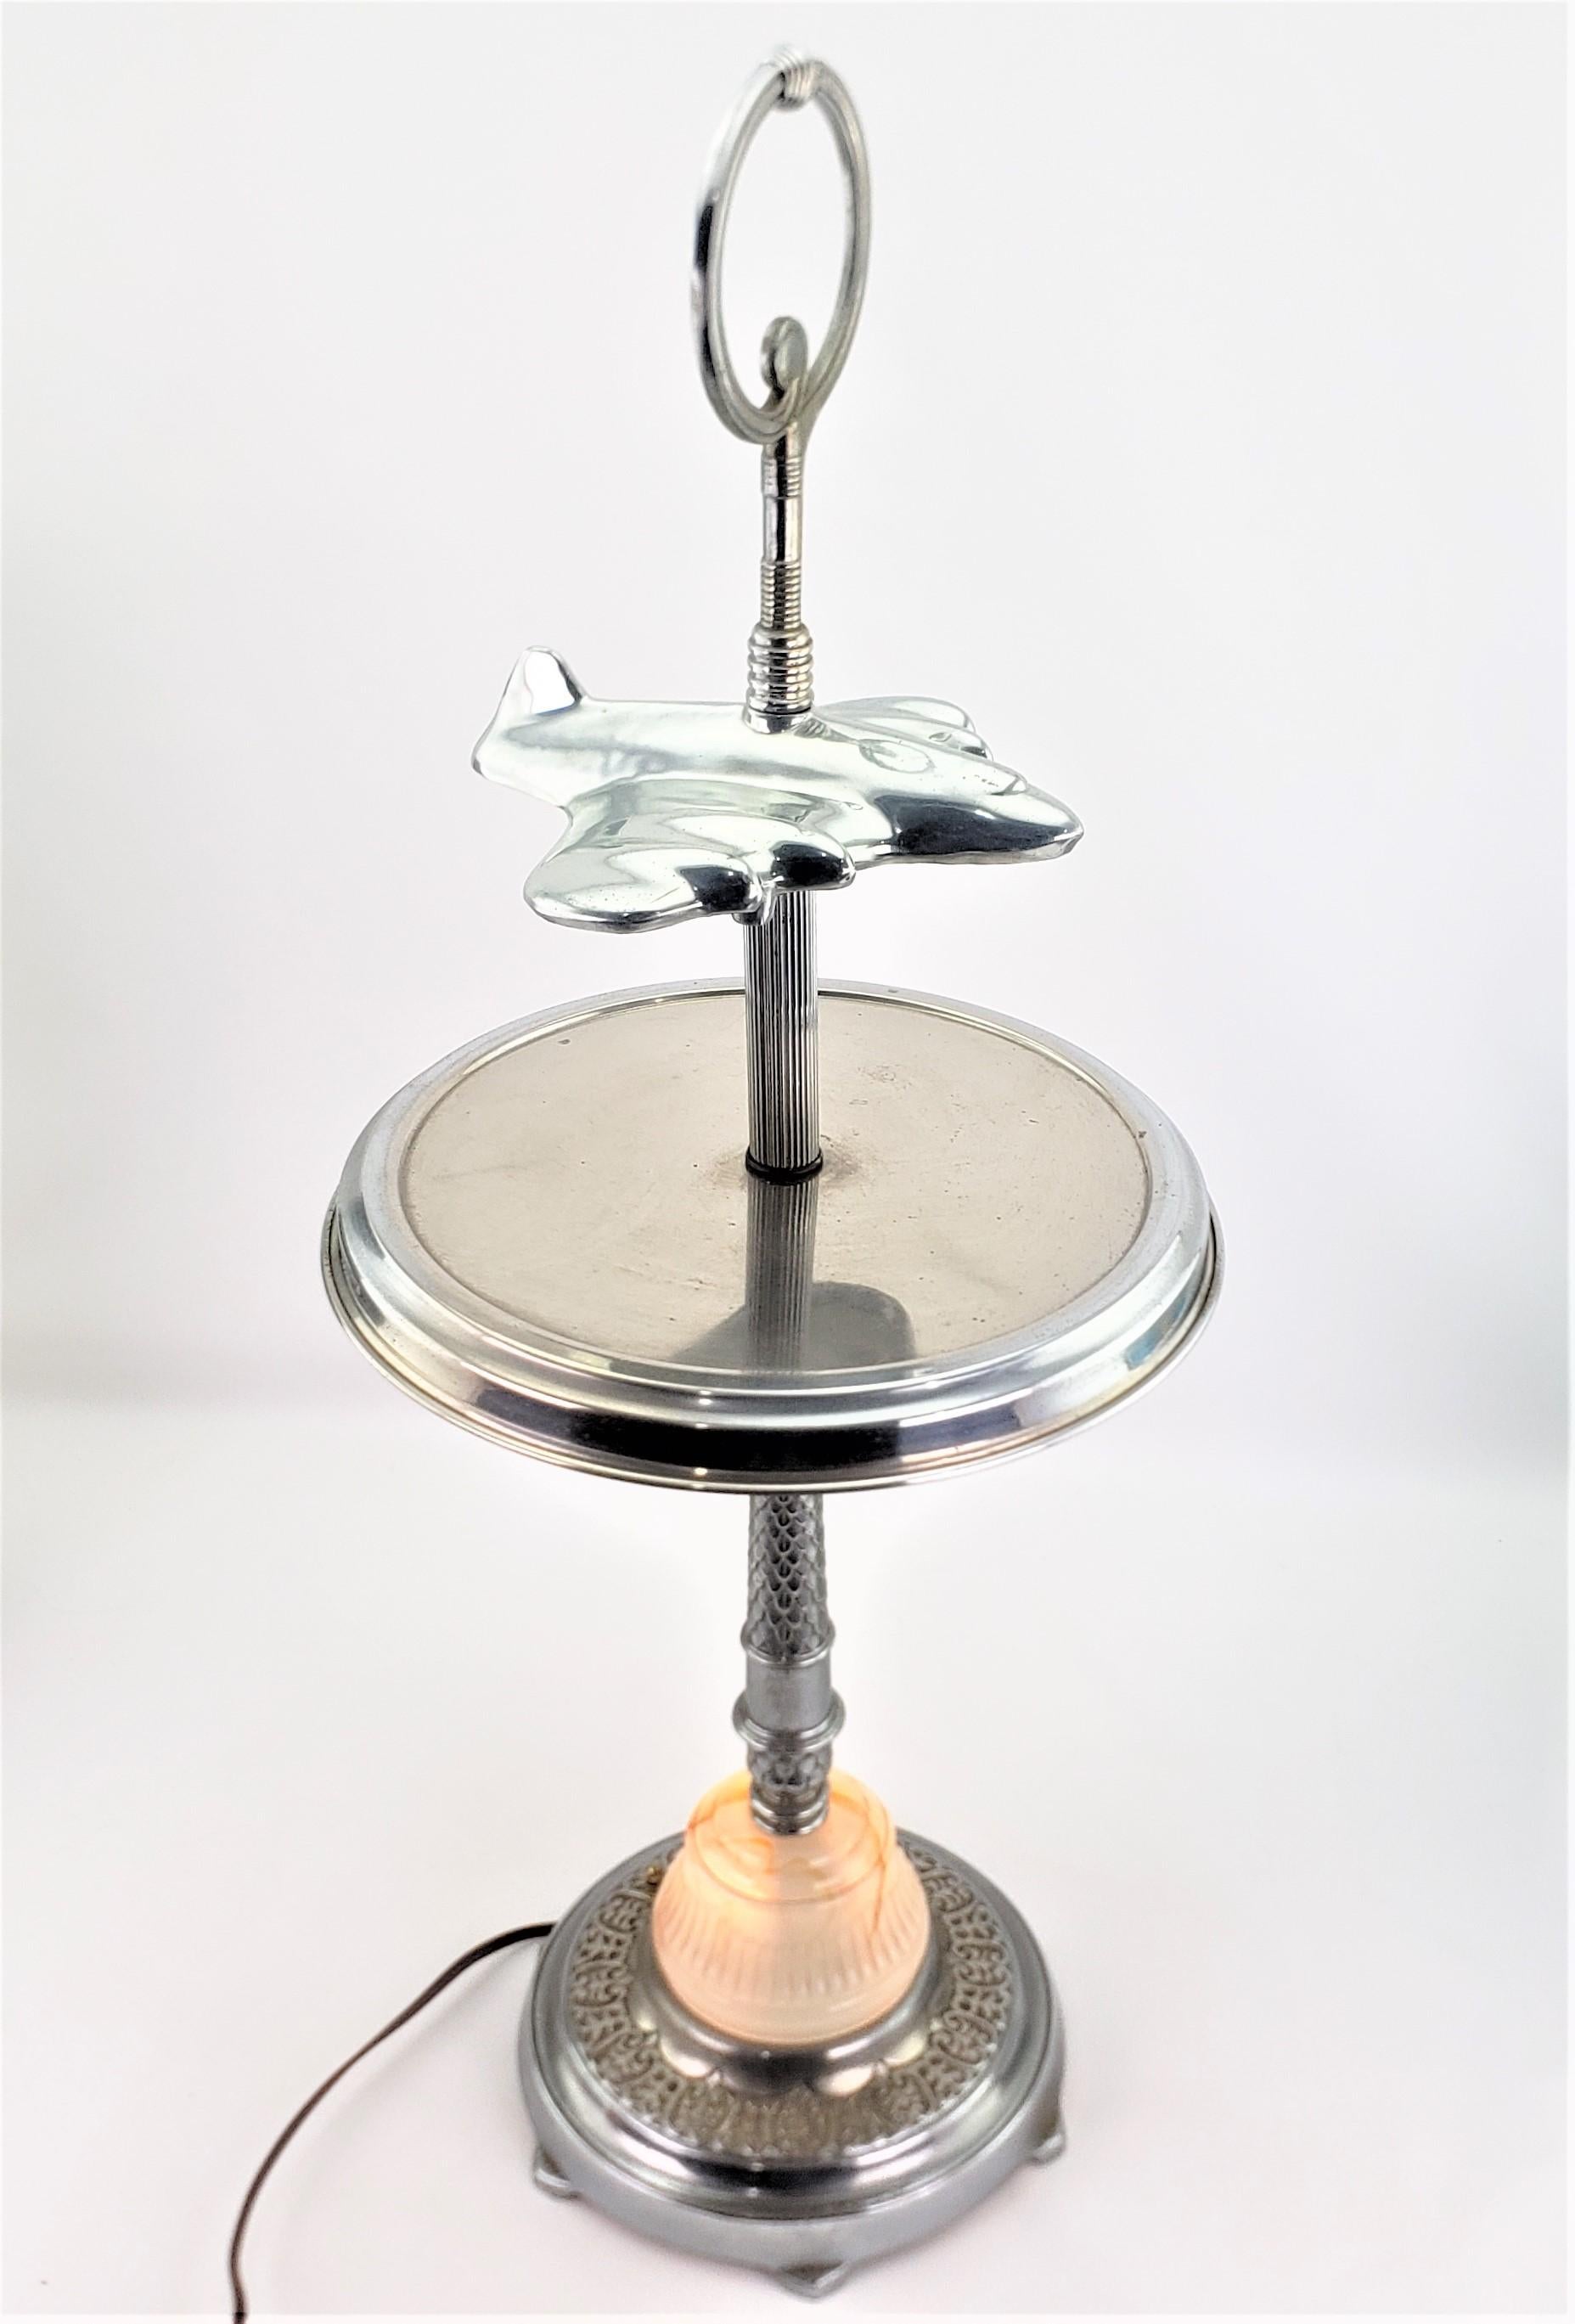 This very unique lighted smoker's stand is unsigned, but presumed to have been made in North America, likely the United States, in approximately 1950 in an Art Deco style. This smoker's stand is done in chromed metal with a streamlined and stylized